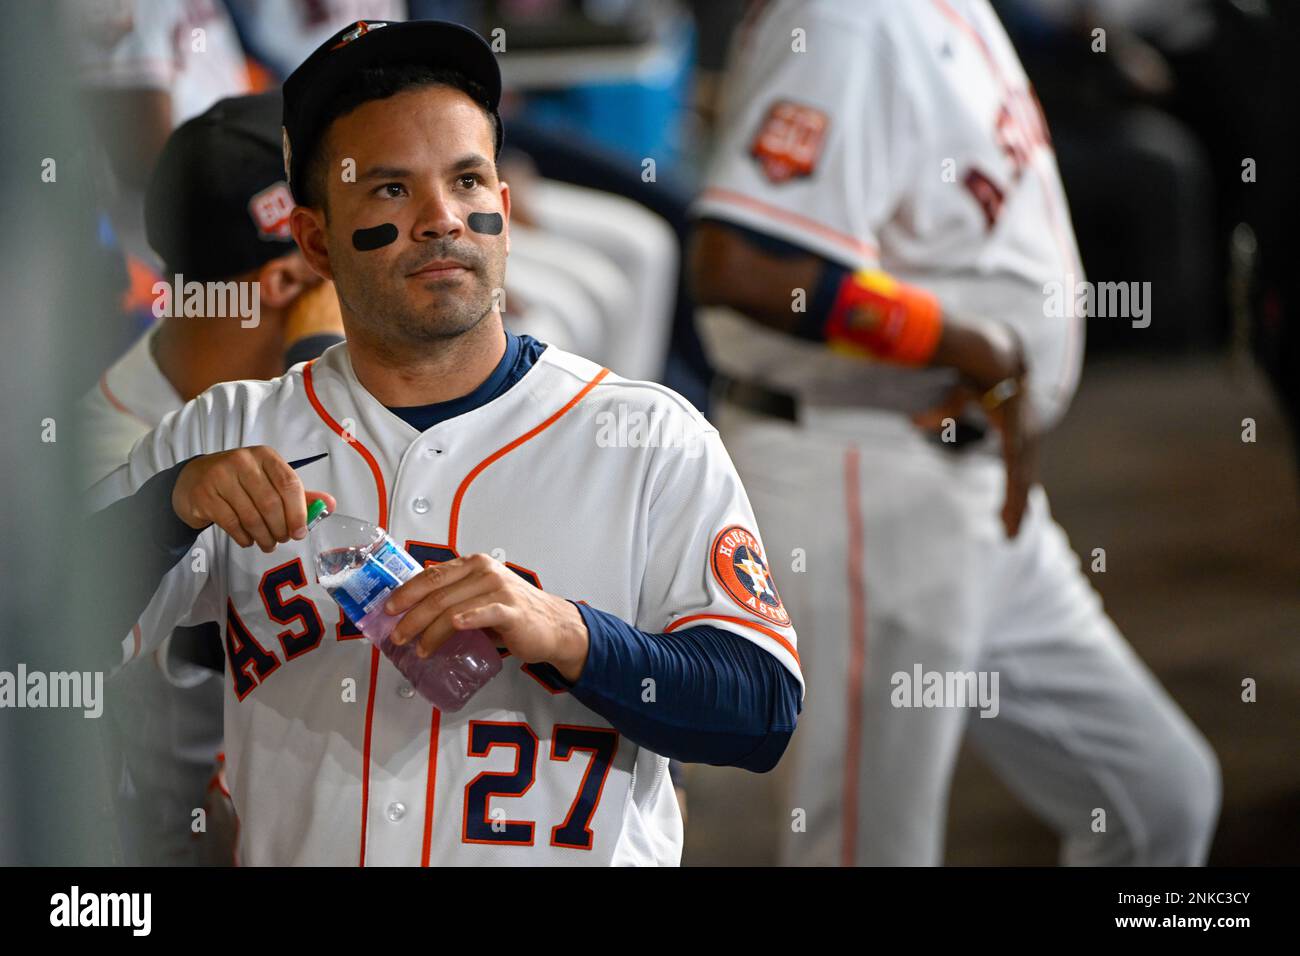 HOUSTON, TX - APRIL 18: Houston Astros second baseman Jose Altuve (27)  watches the jumbotron from the dugout before the baseball game between the  Los Angeles Angels and Houston Astros at Minute